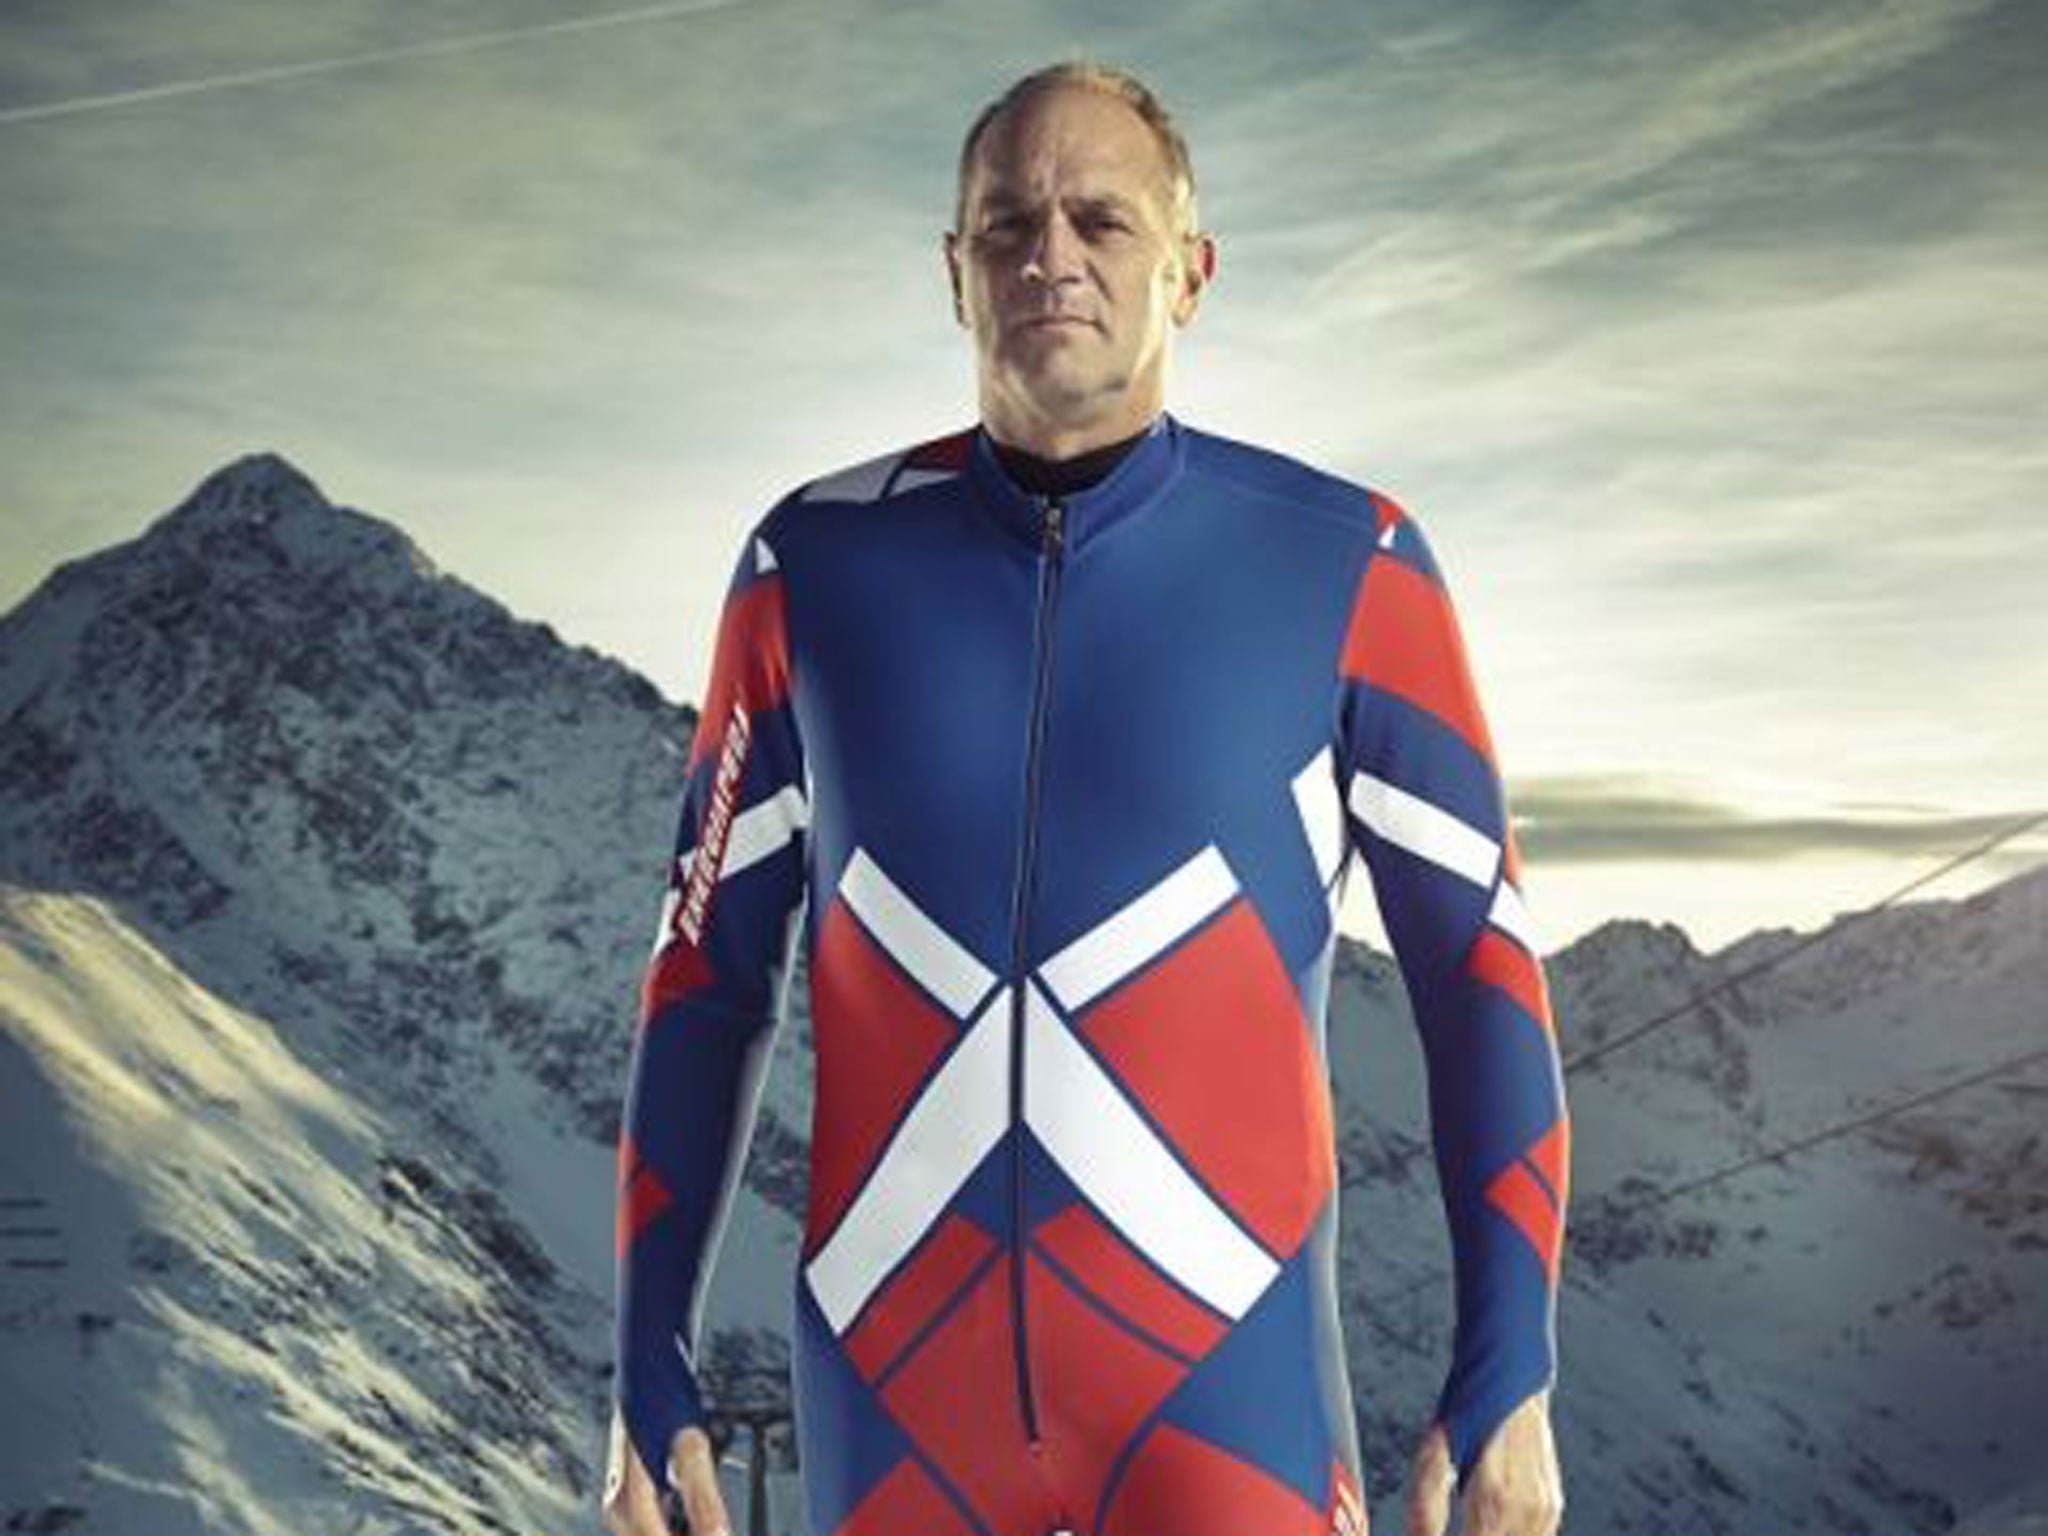 On the piste: Sir Steve Redgrave dons his skiing gear for Jump